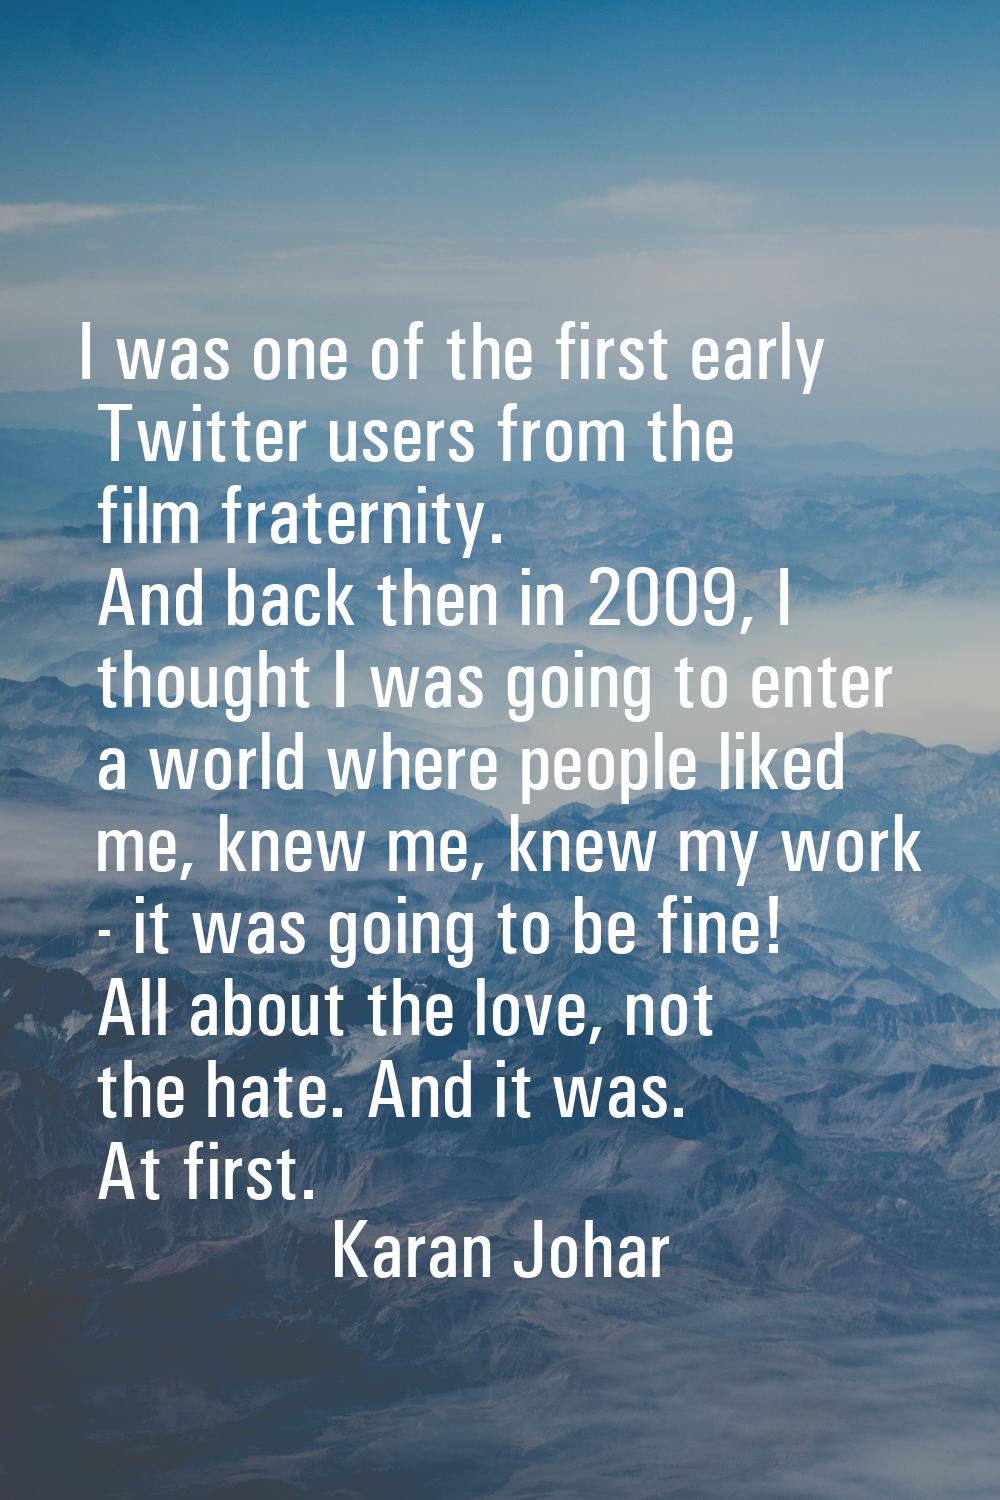 I was one of the first early Twitter users from the film fraternity. And back then in 2009, I thoug